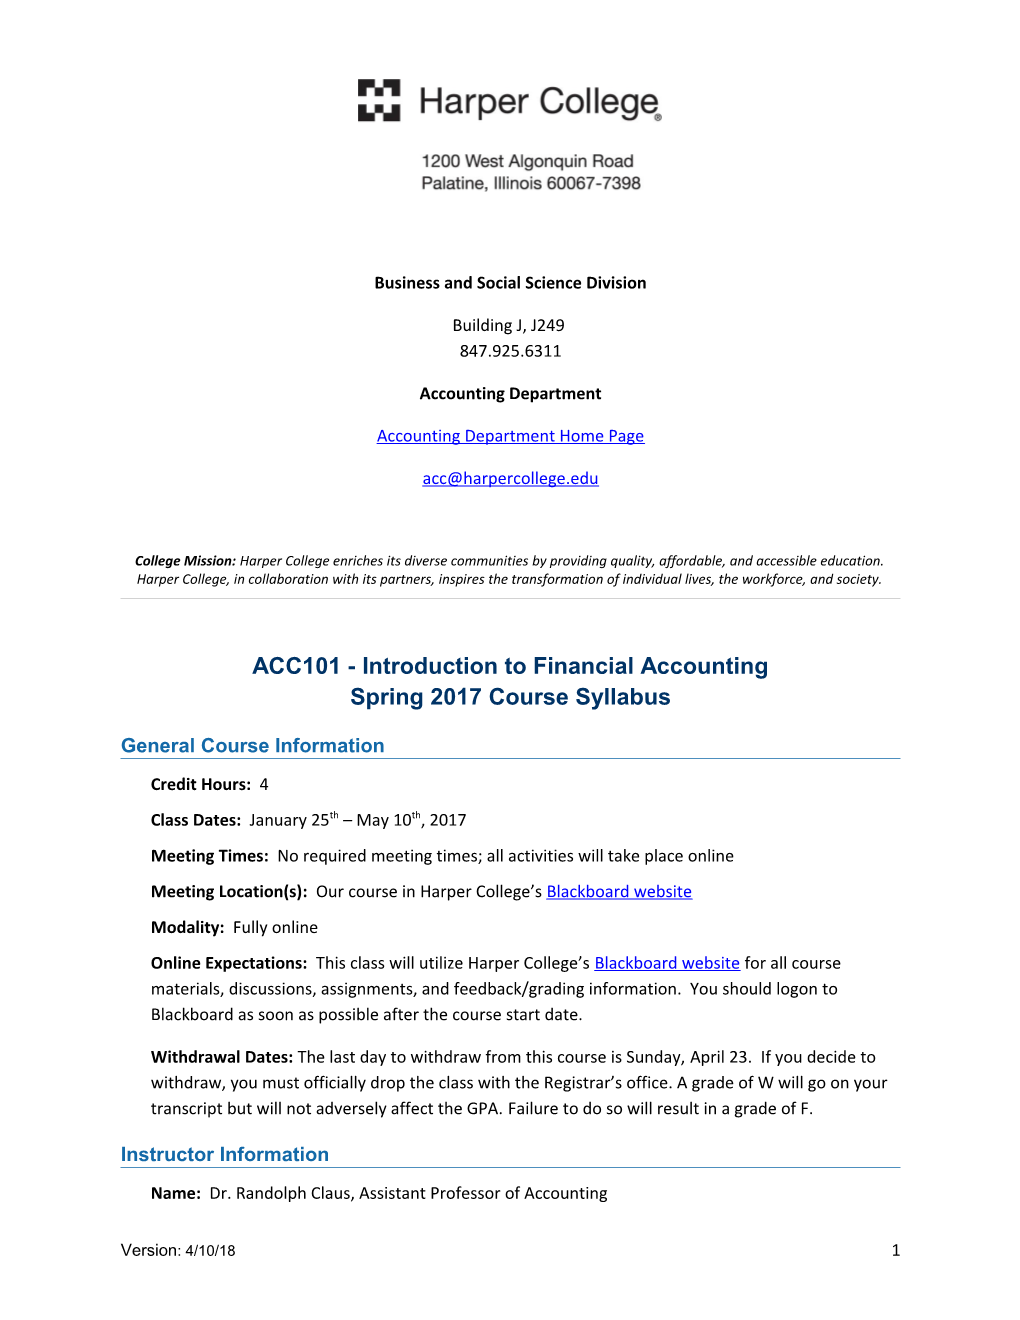 ACC101 - Introduction to Financial Accounting